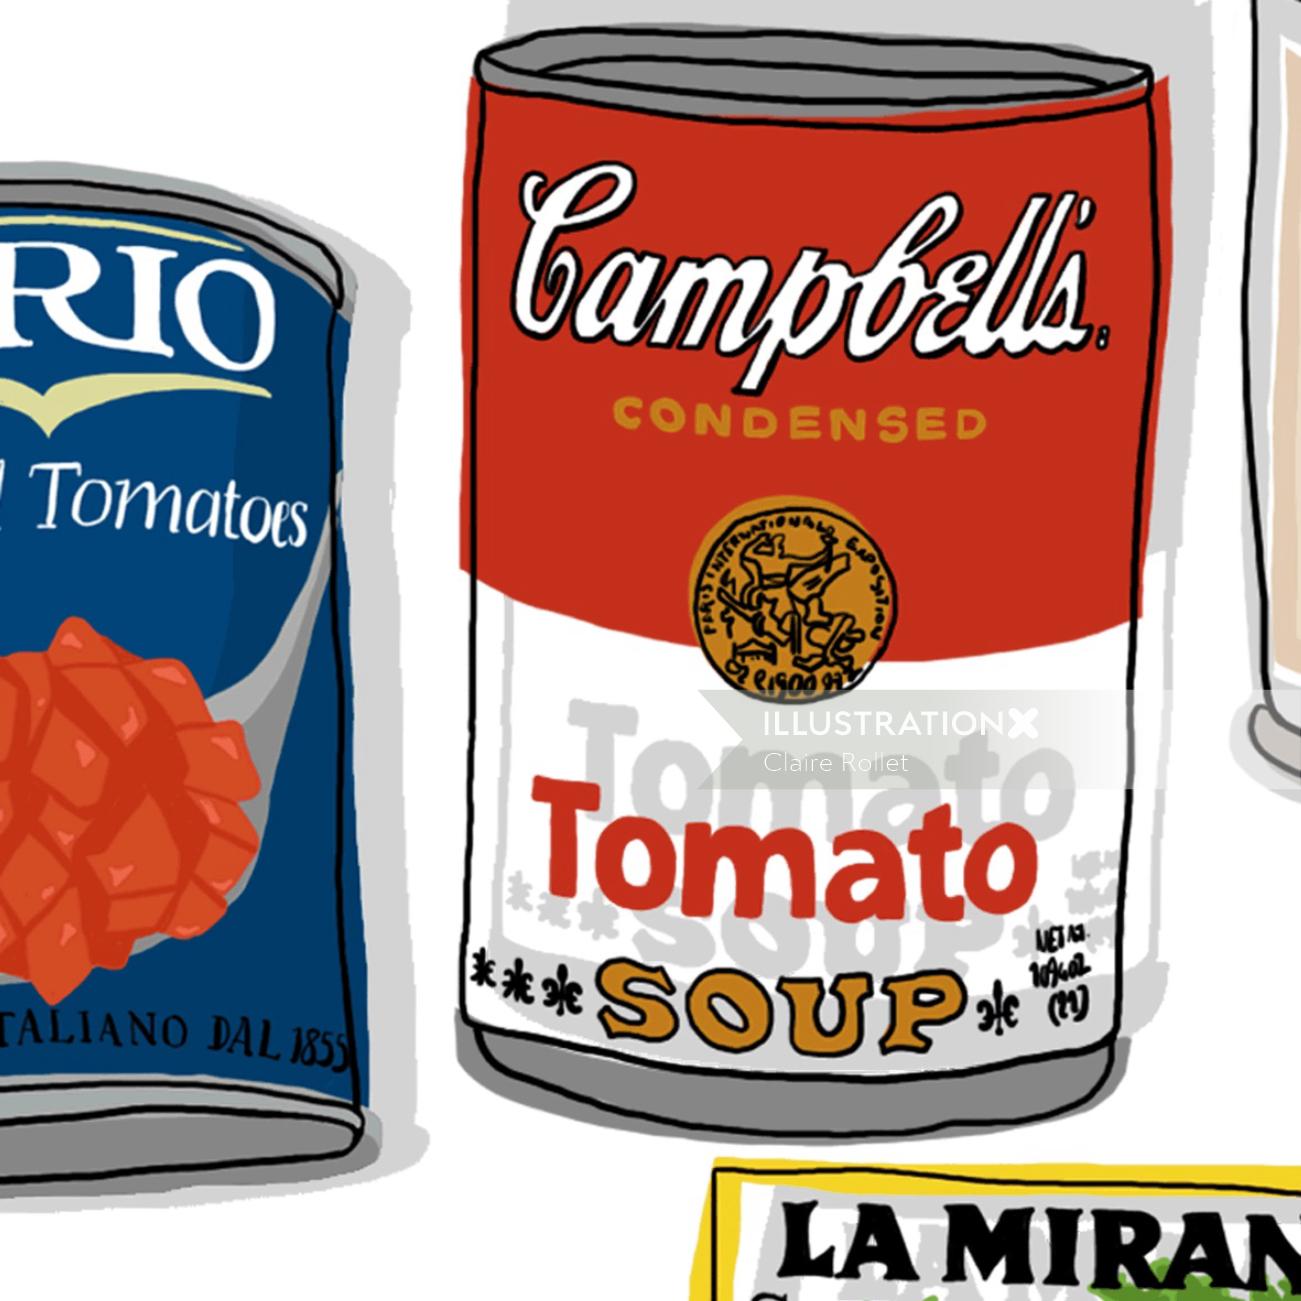 illustration of Campbell soup packaging by Claire Rollet